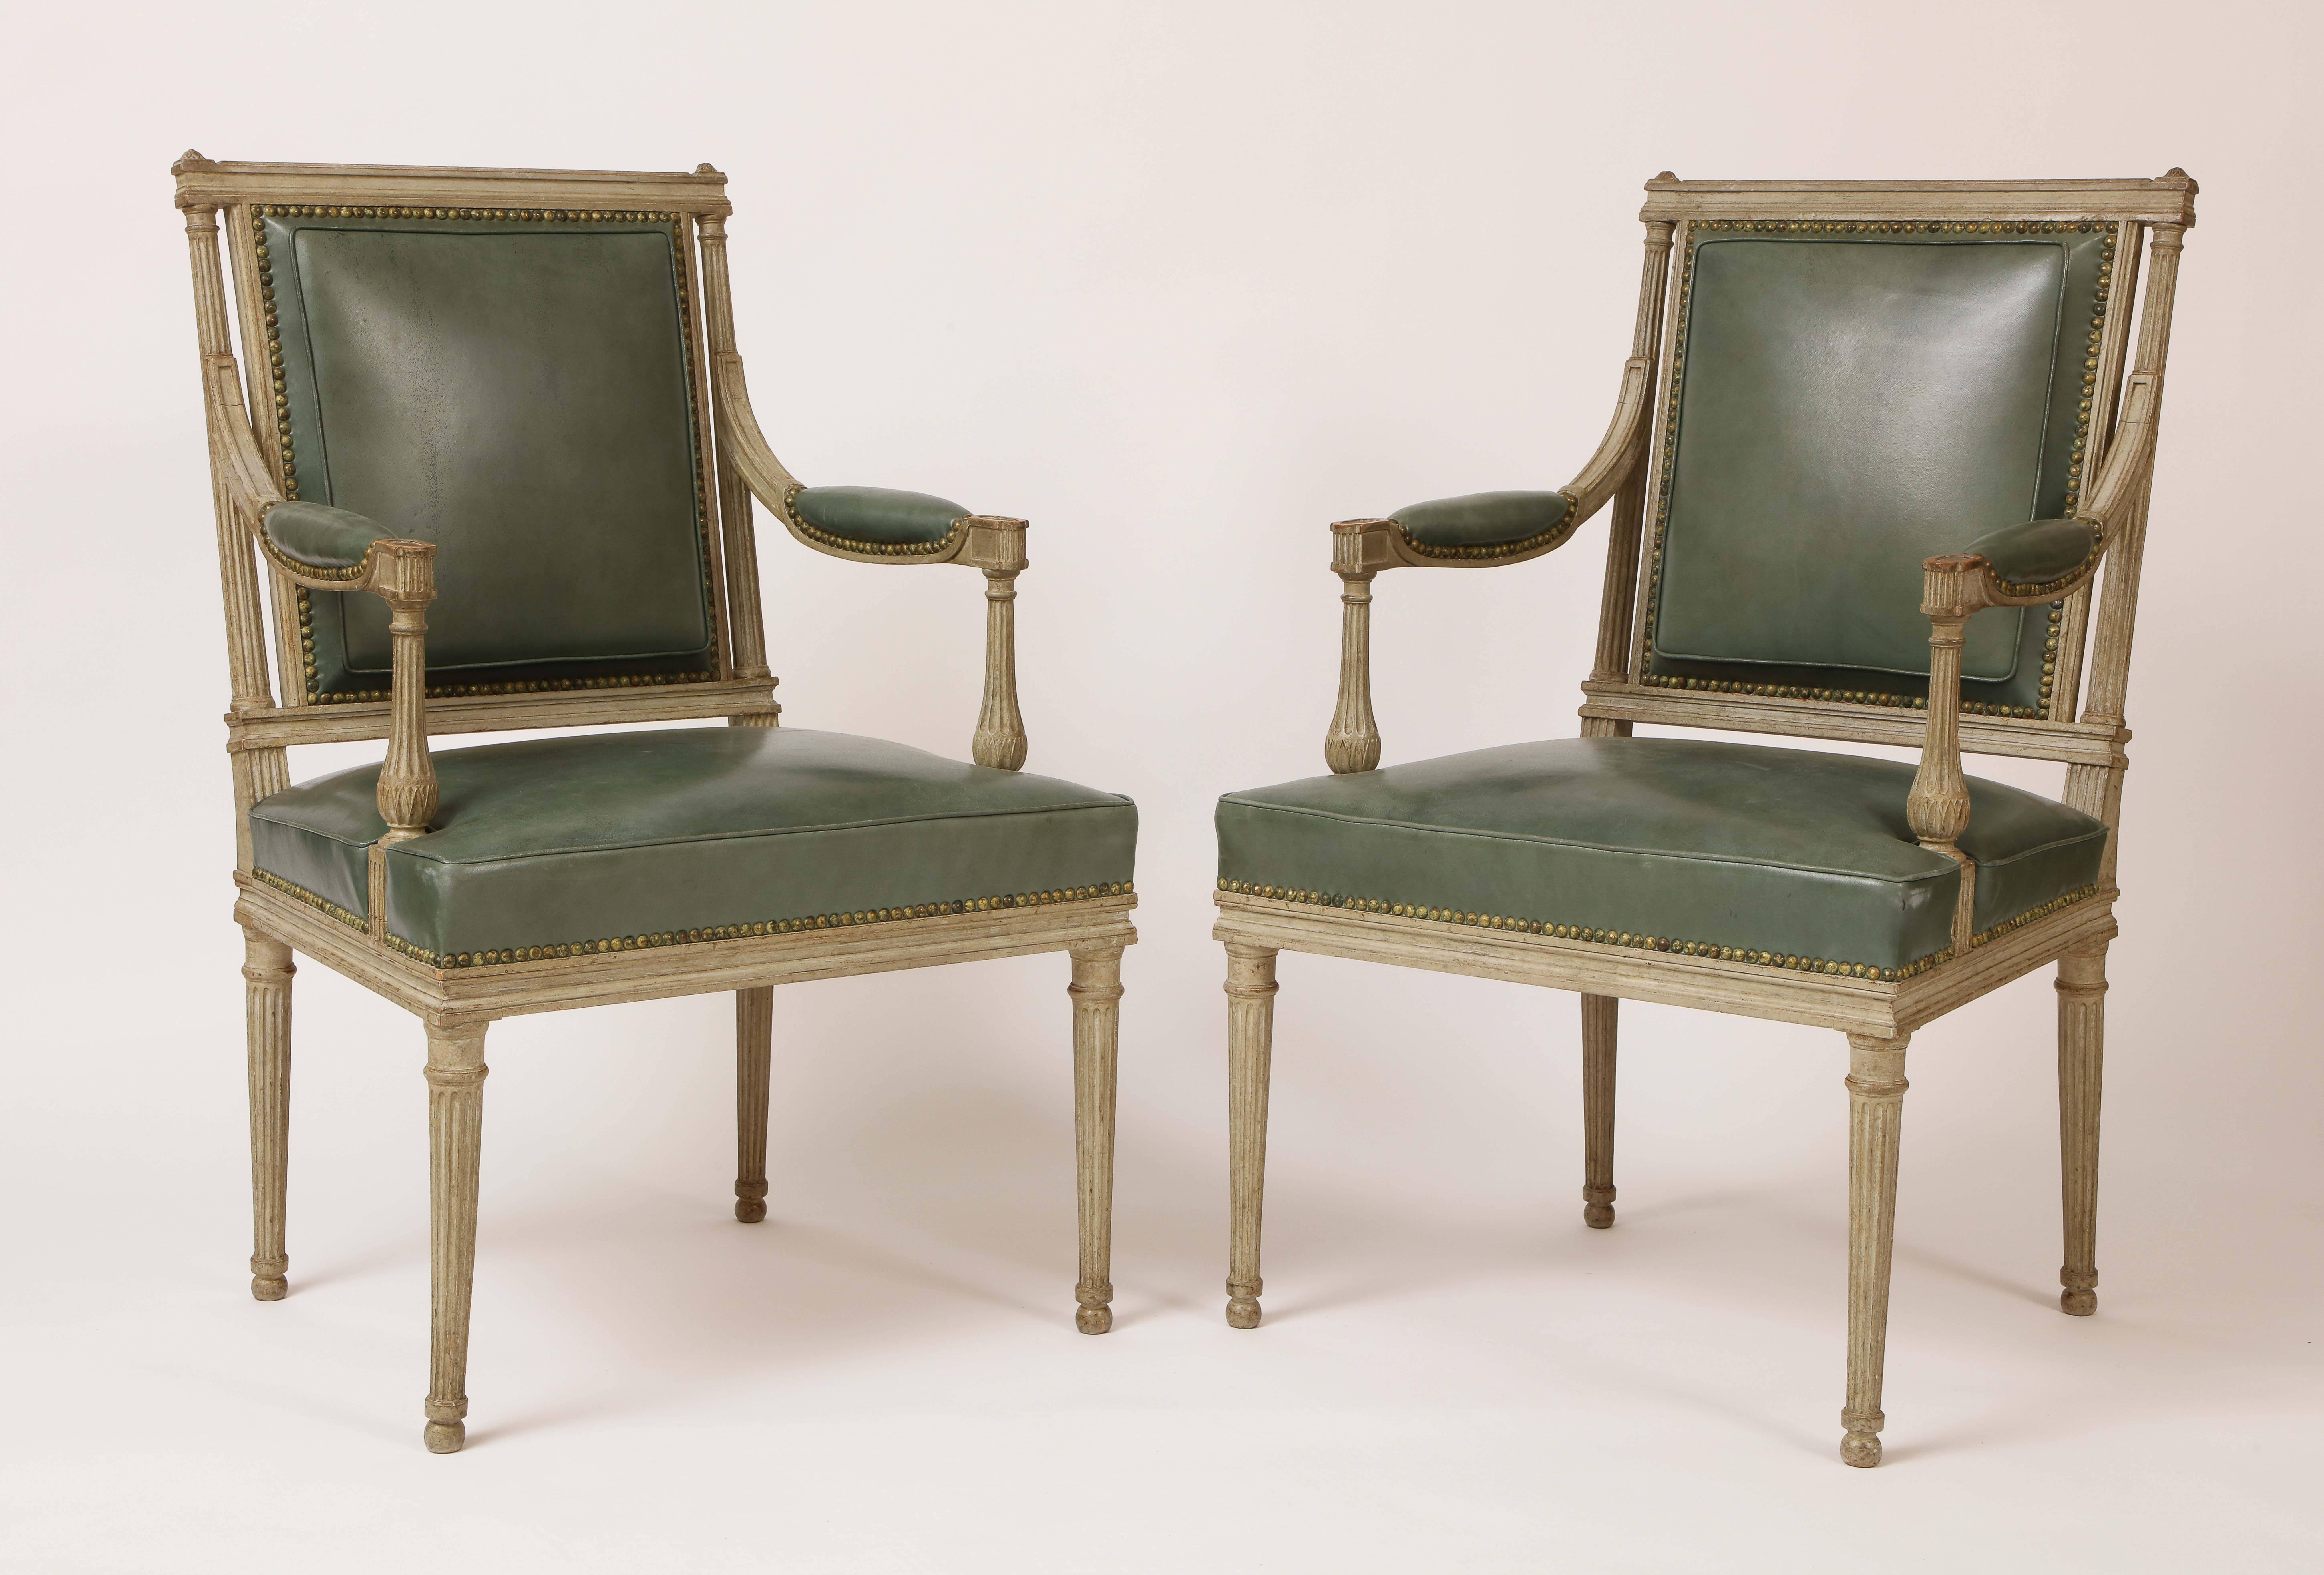 This fine pair of French neoclassical armchairs (fauteuils) was made by Maison Jansen. Made of grayish white painted beechwood with green leather upholstery, these chairs are in the Louis XVI taste with finely carved fluted columnar back supports